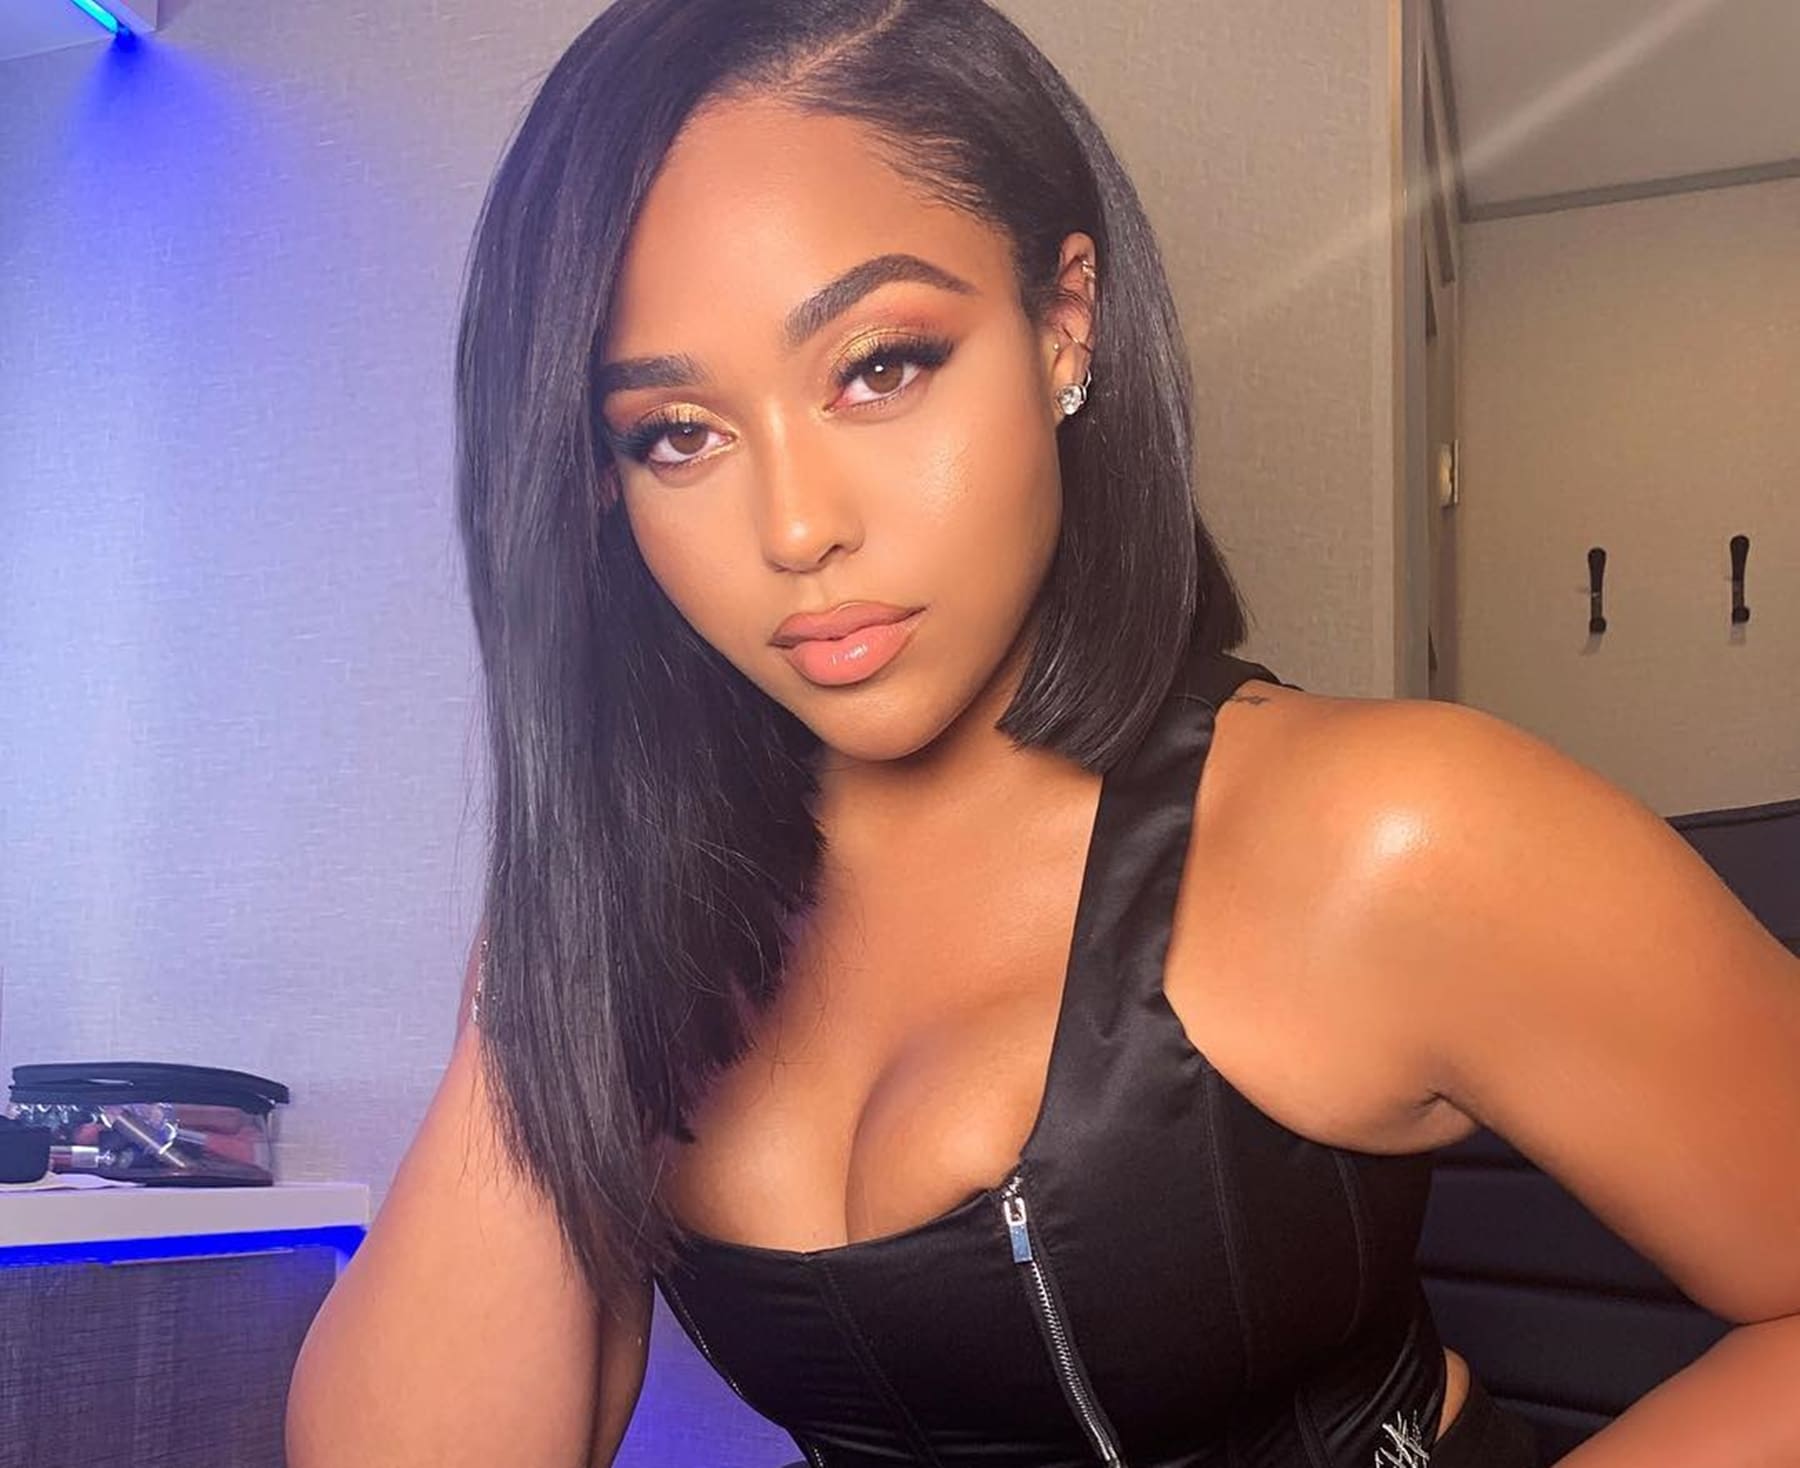 jordyn-woods-workout-session-has-everyone-in-awe-an-interesting-detail-about-kanye-west-has-fans-talking